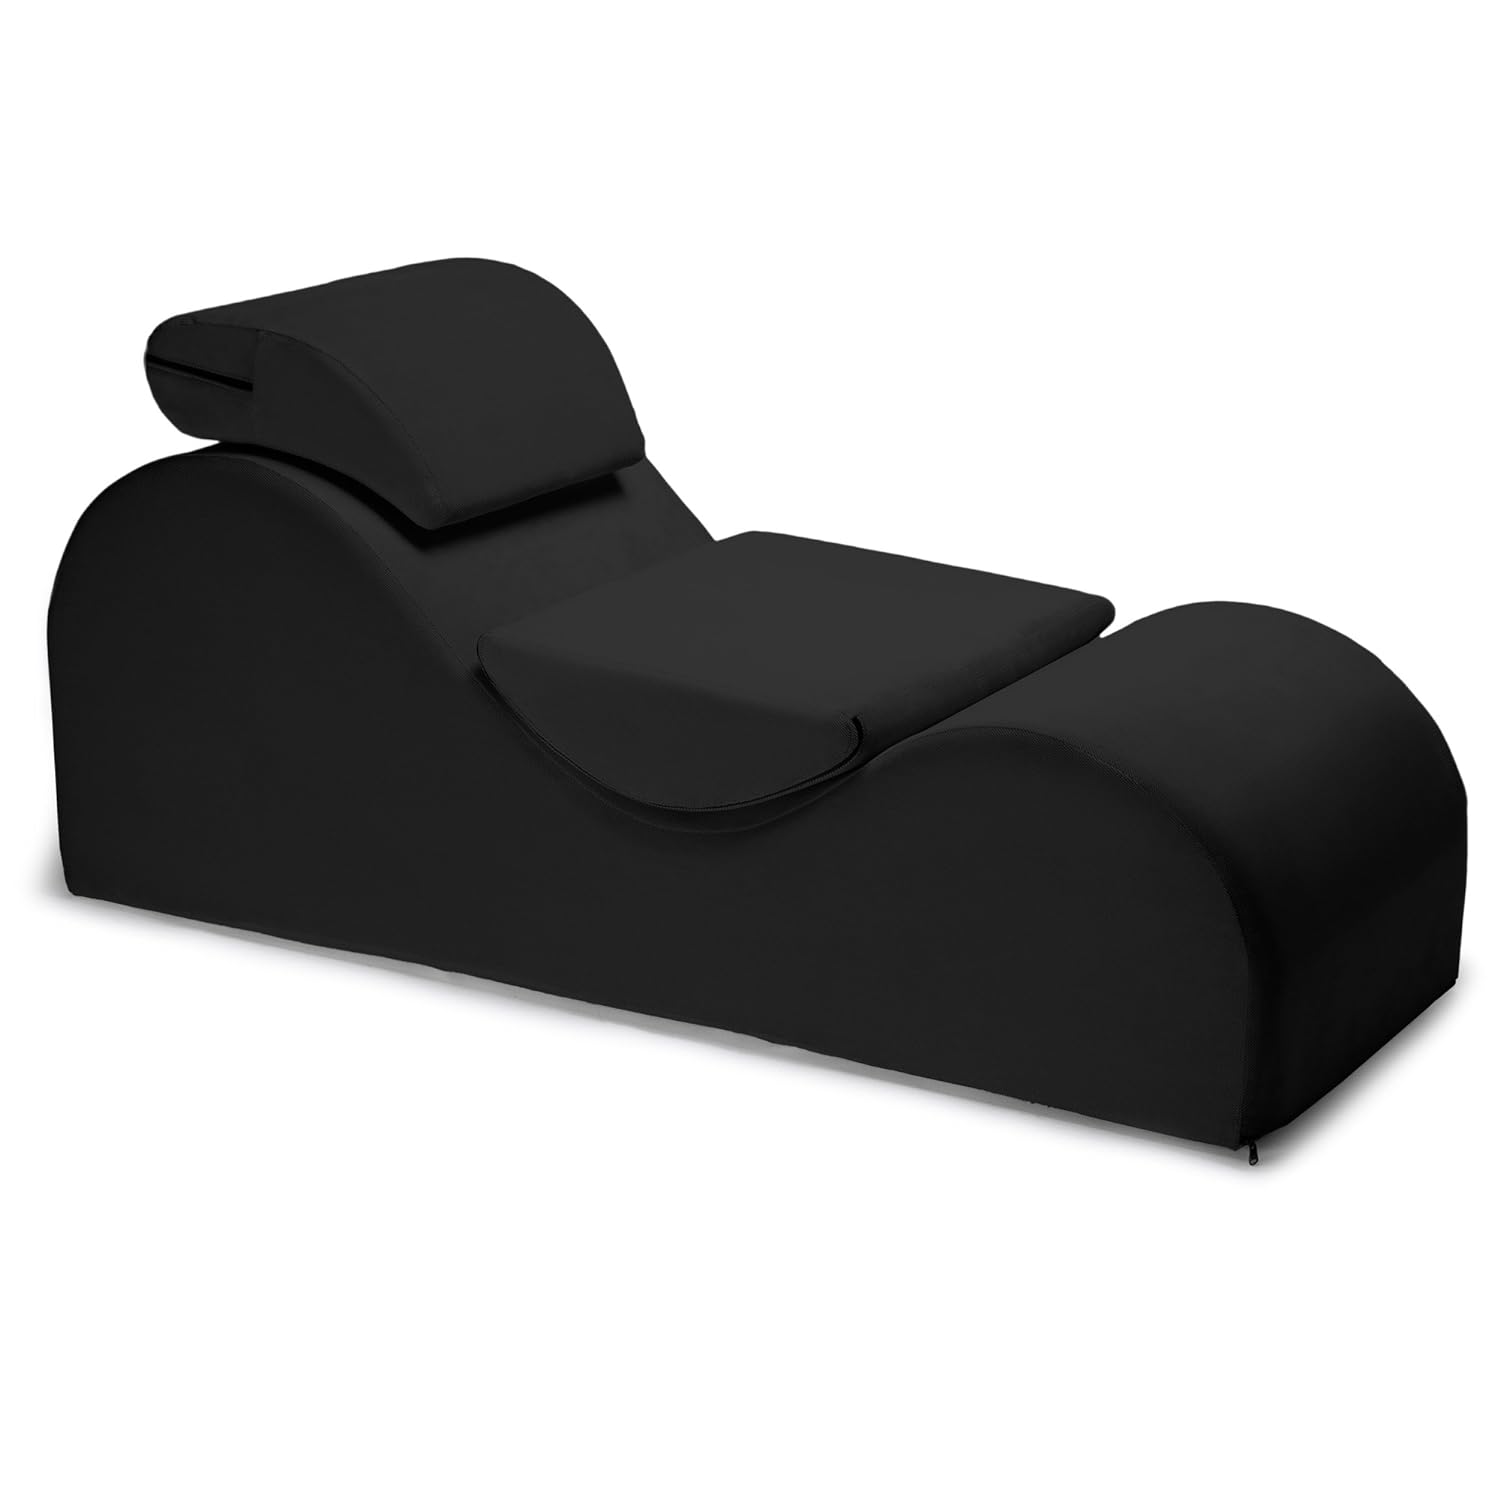 Black and white sex chair